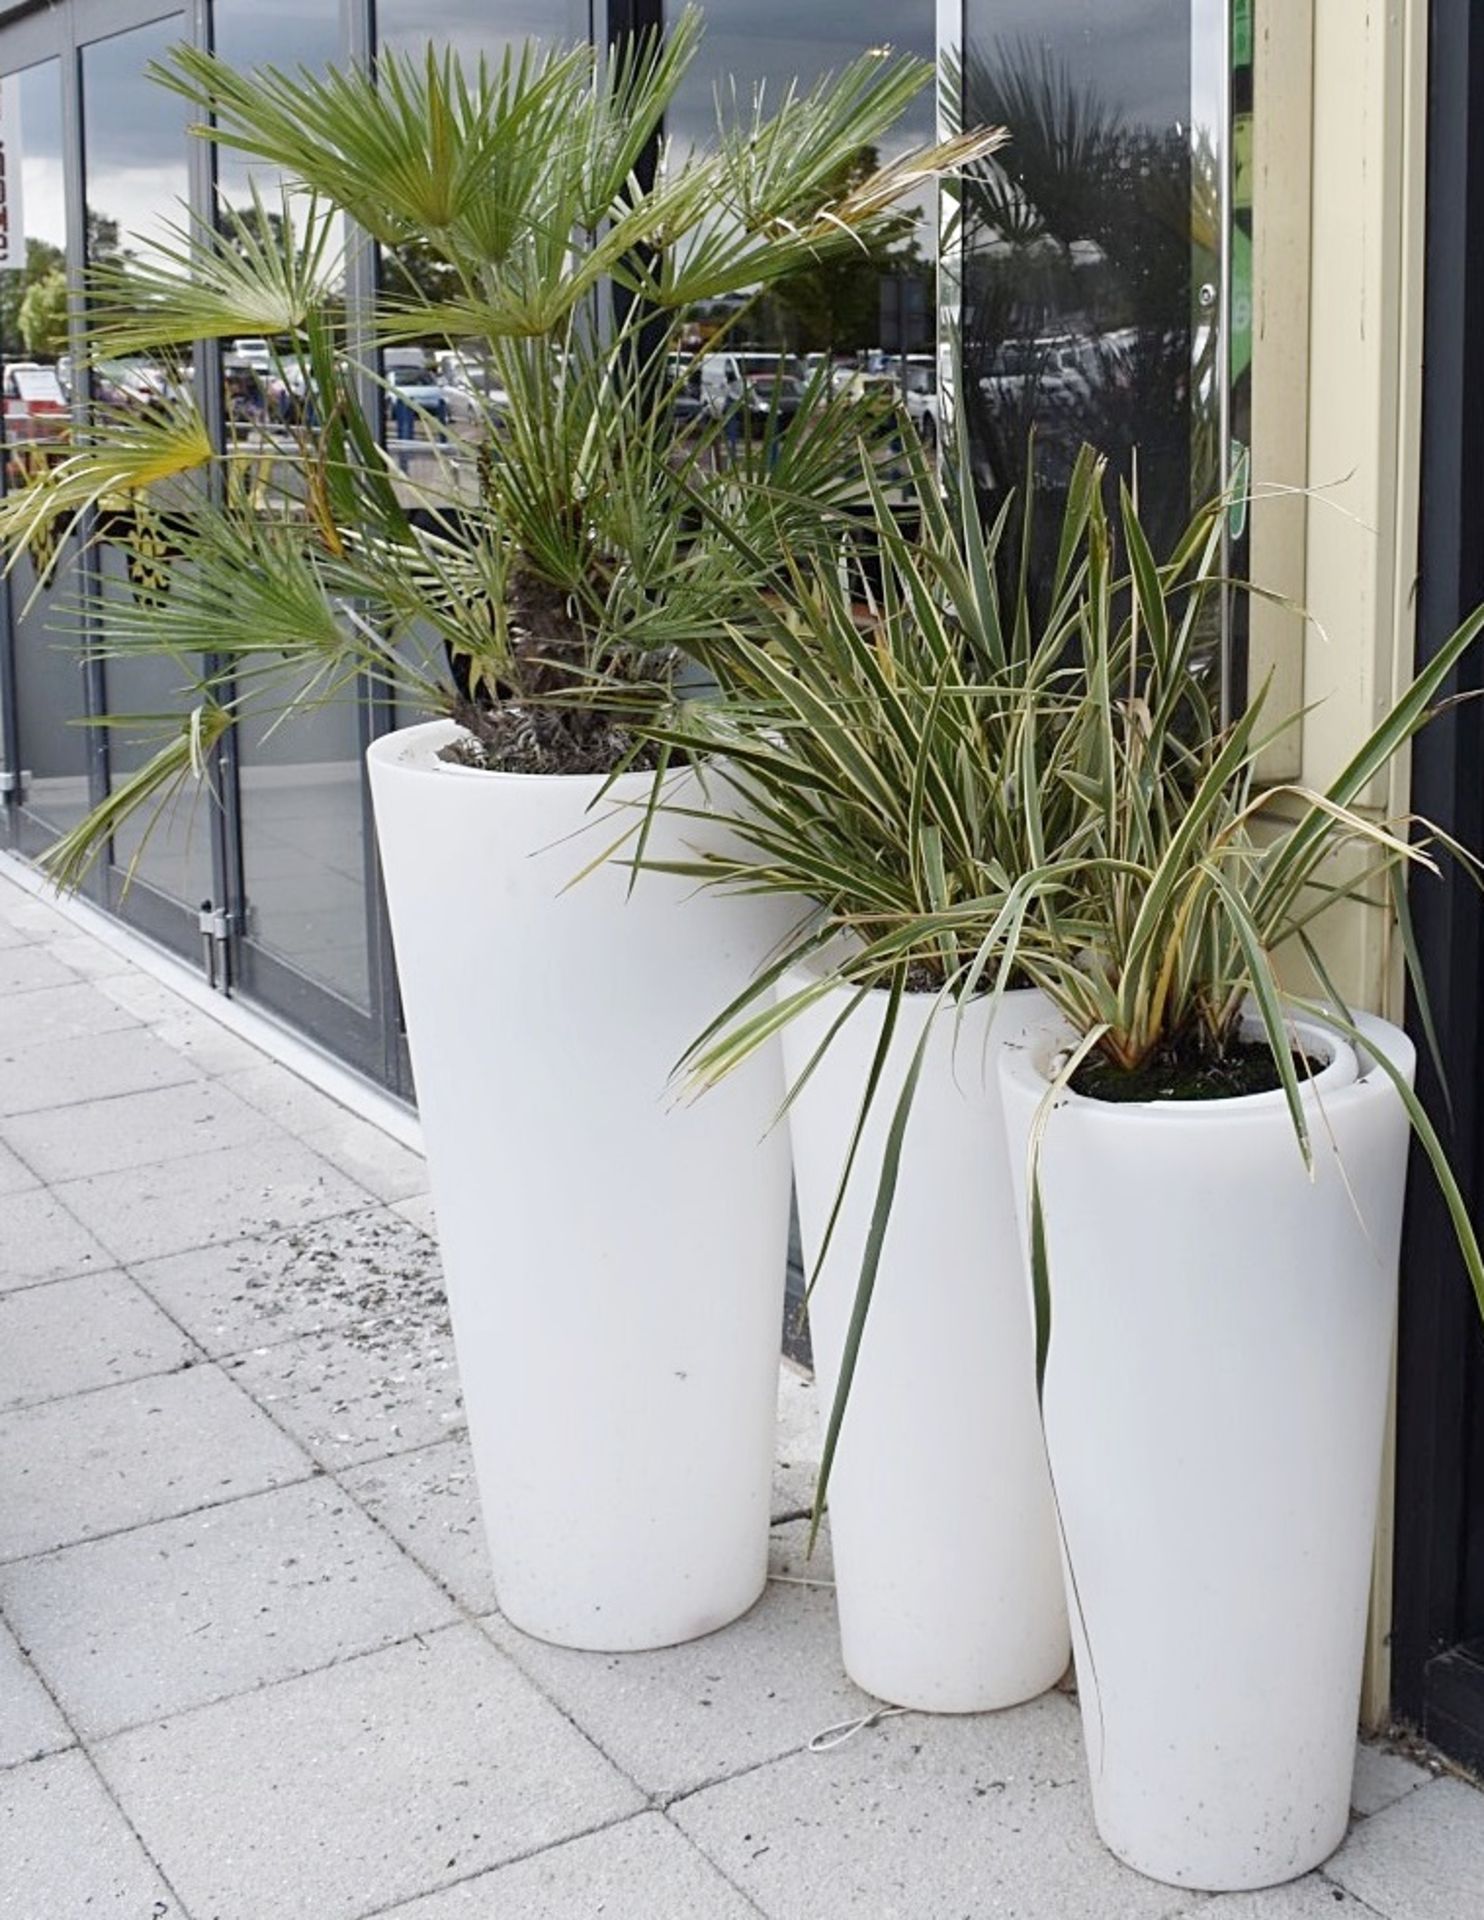 6 x Outdoor Plants In Illuminated Planters - Sizes Vary - Sizes Vary - Ref: CB OS - CL420 - Bild 6 aus 6